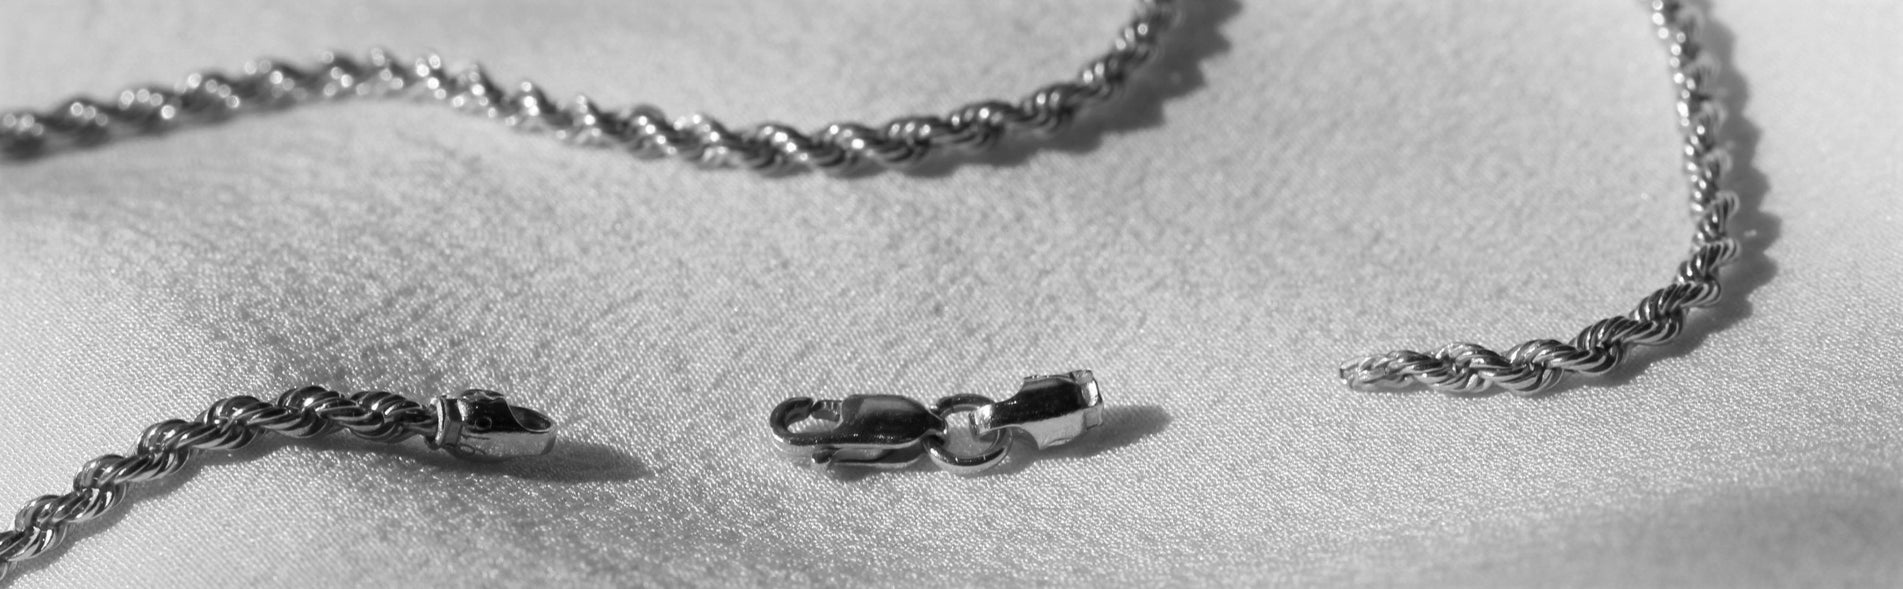 Black and white image of gold chain broken for jewellery repairs and alterations at Orsini Fine Jewellery